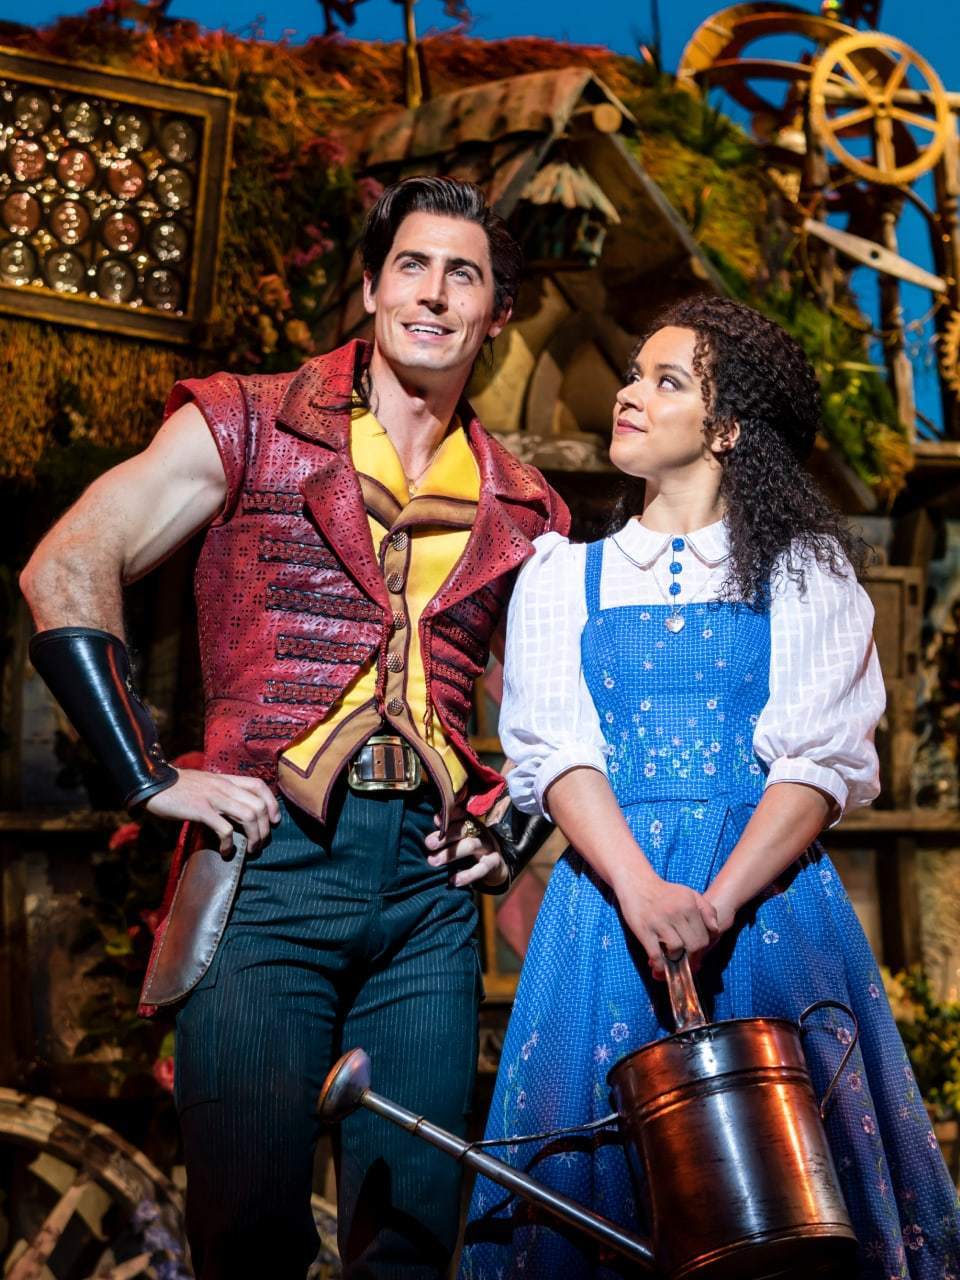 Tom Senior as Gaston and Courtney Stapleton as Belle in front of a little house on a village background.